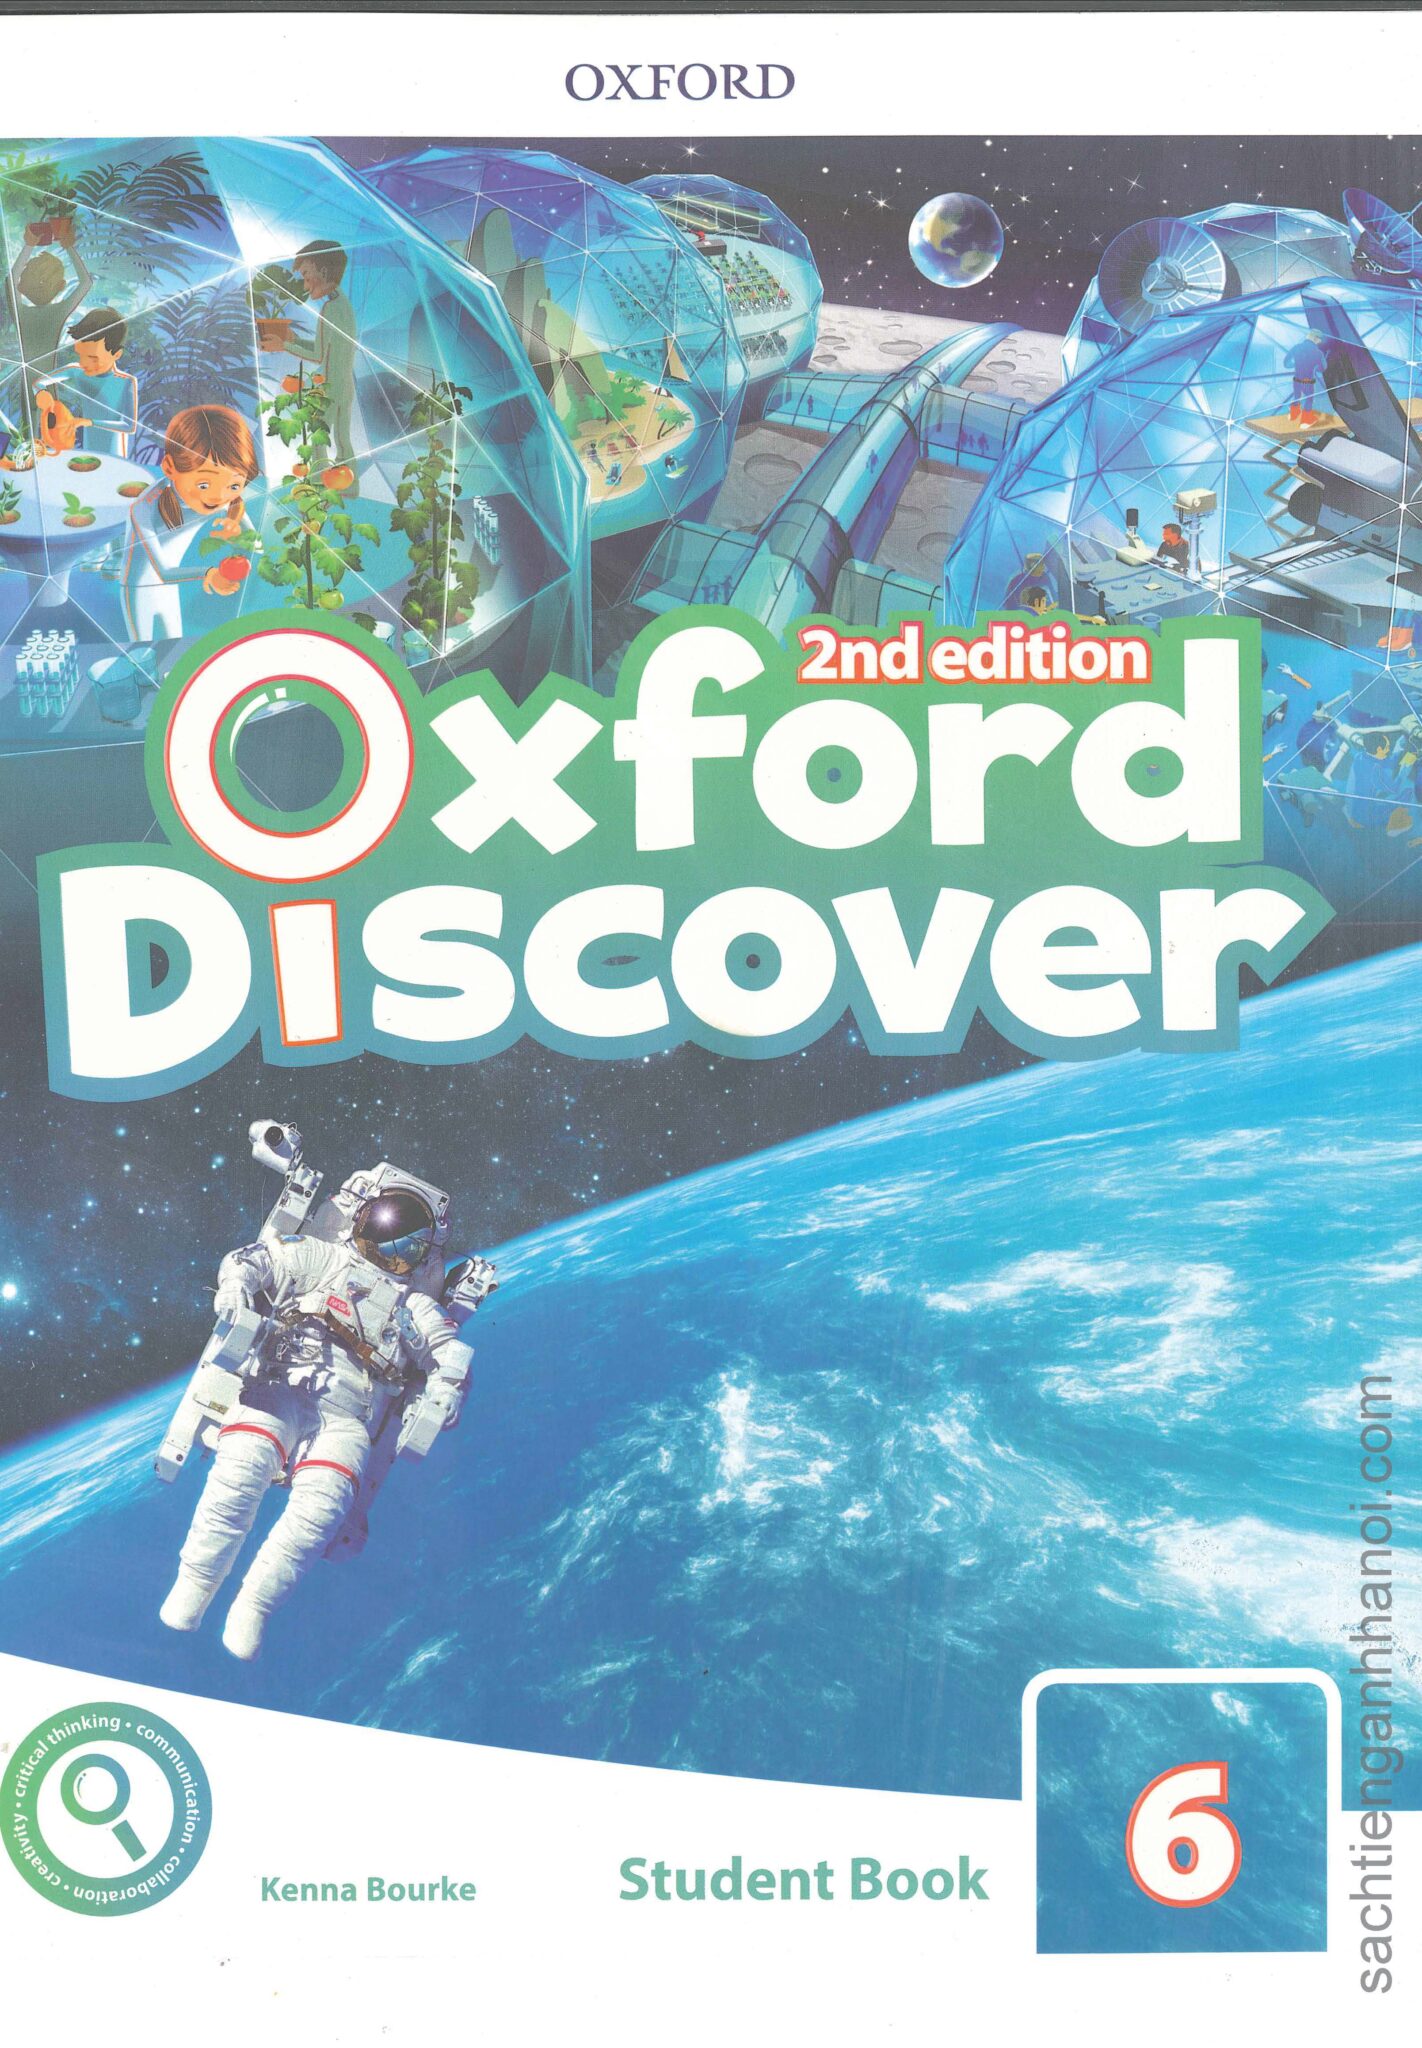 Discover workbook. Oxford discover 1 student book 2nd Edition Audio. Oxford discover 1 student's book 2nd Edition. Oxford discover 2 Edition 2. Workbook second Edition Oxford discover.